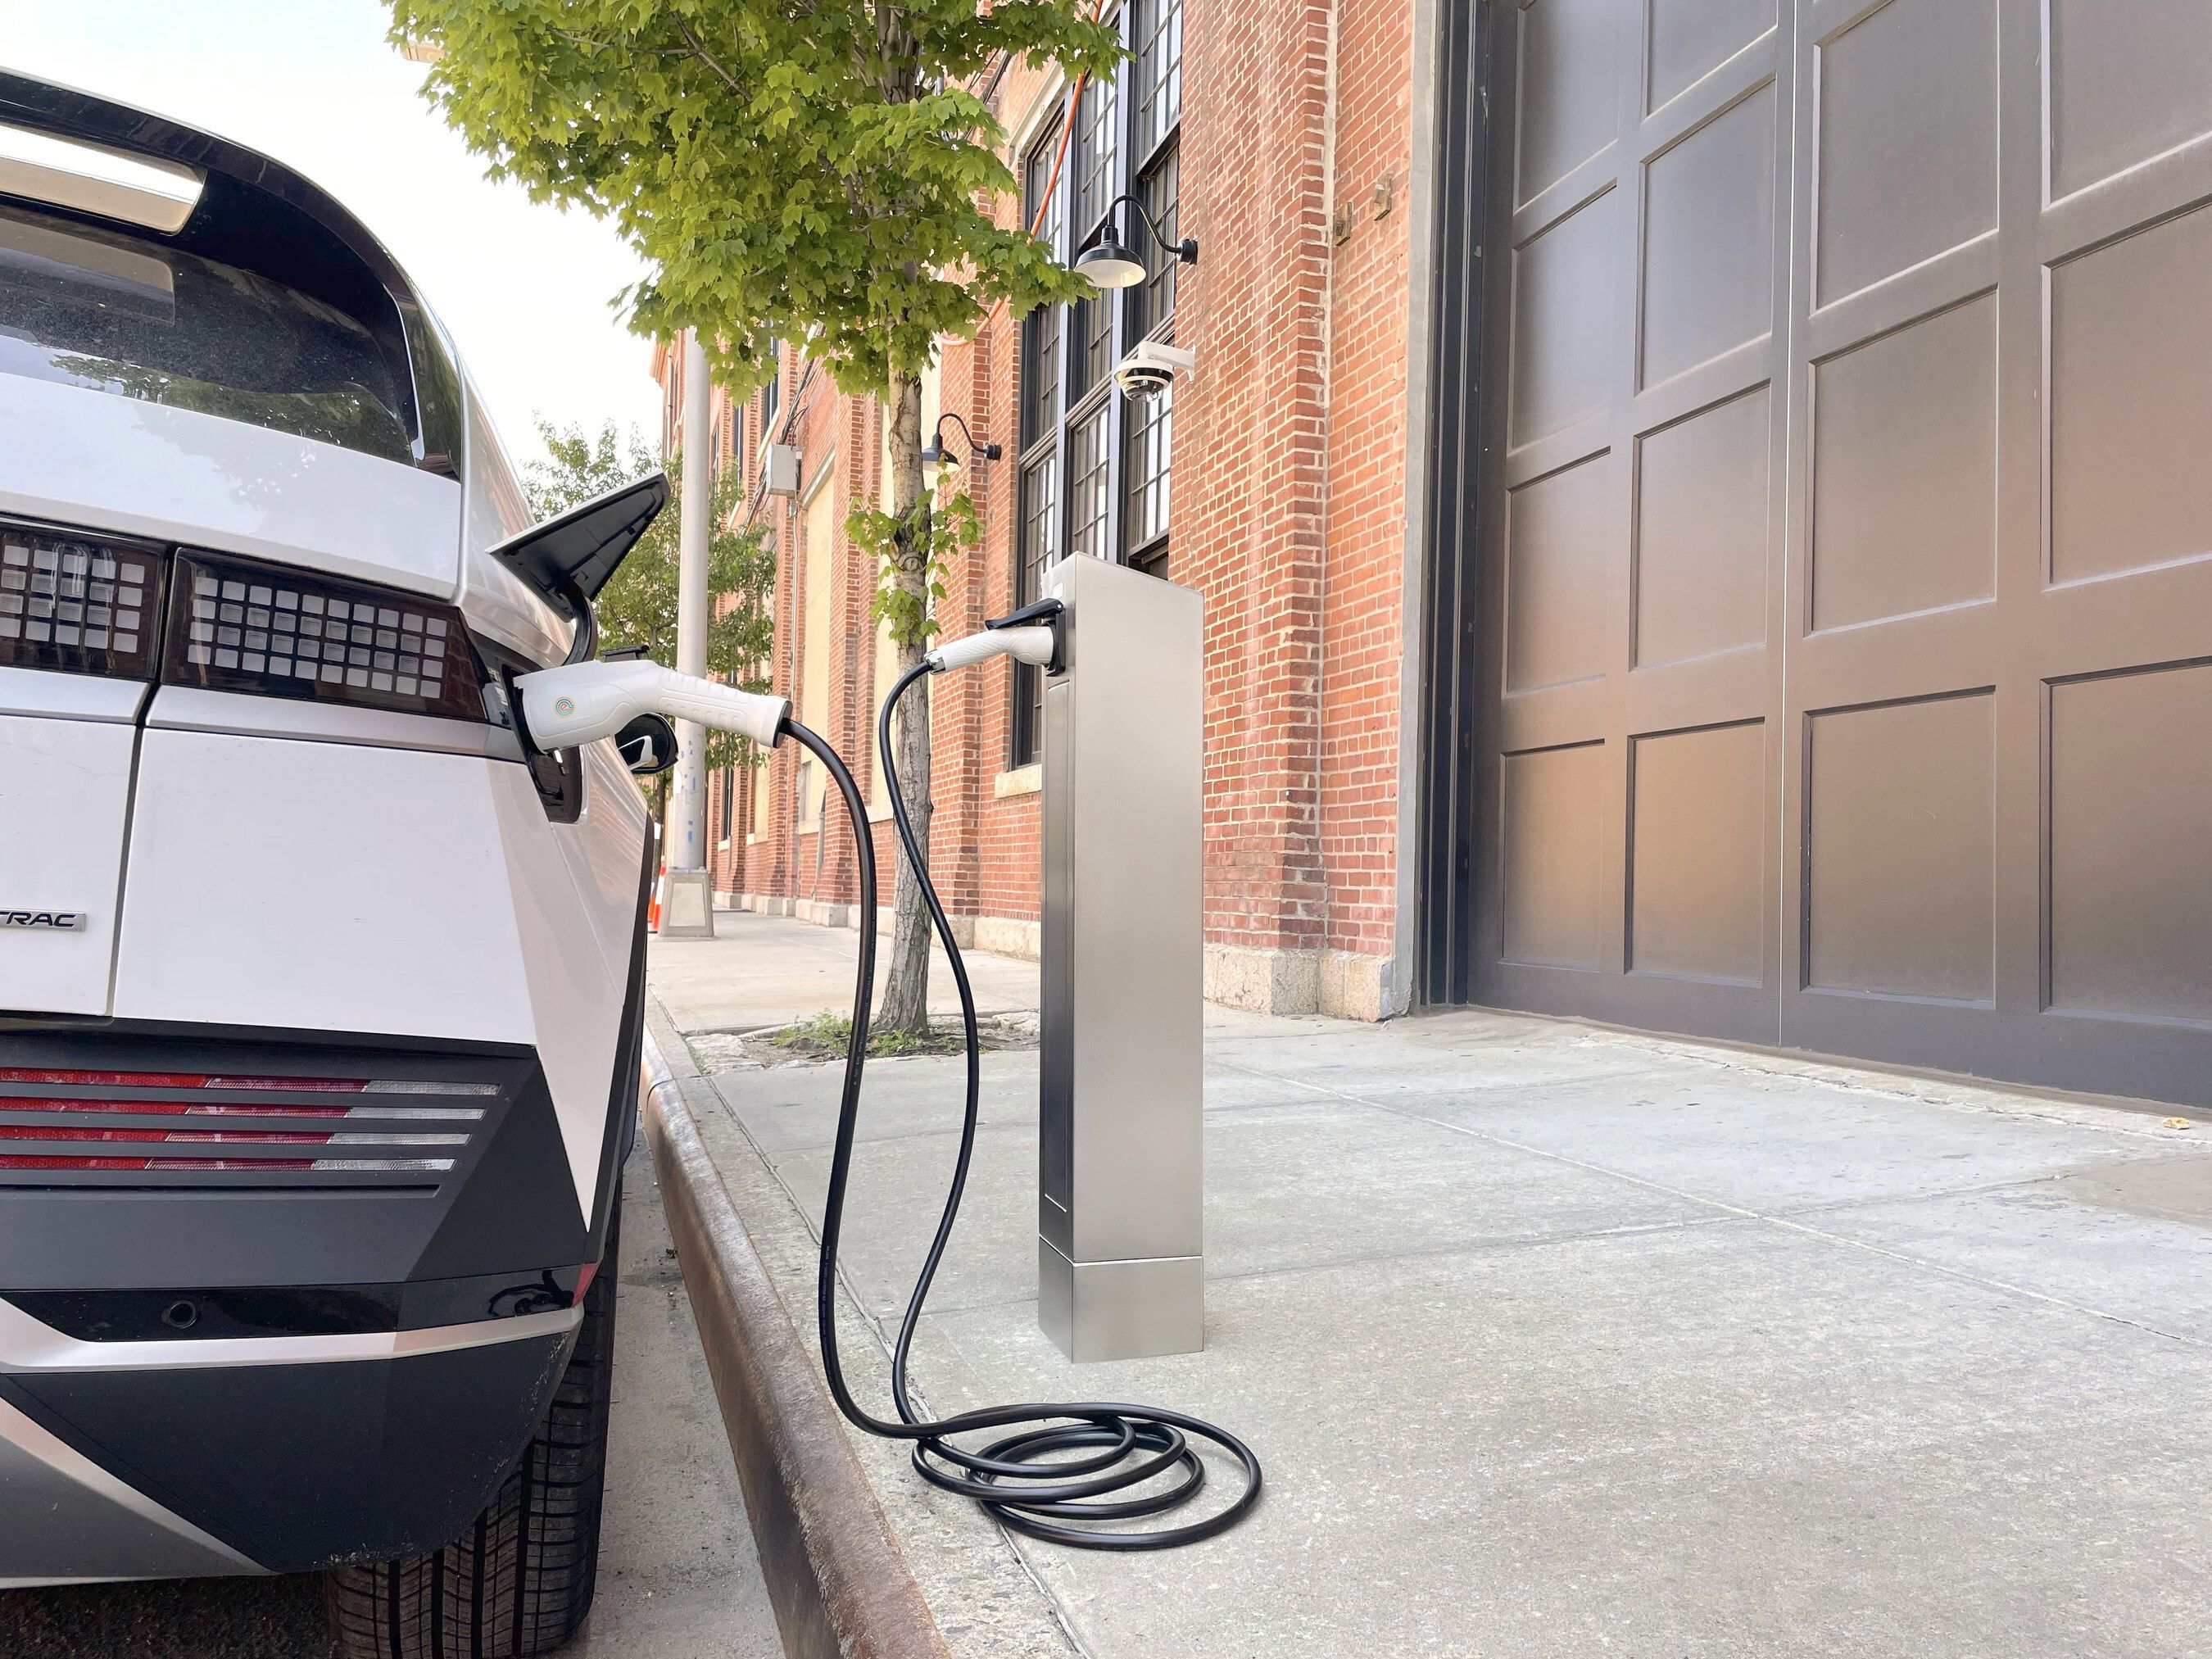 News - Different Types of EV chargers to Suit Different Types of